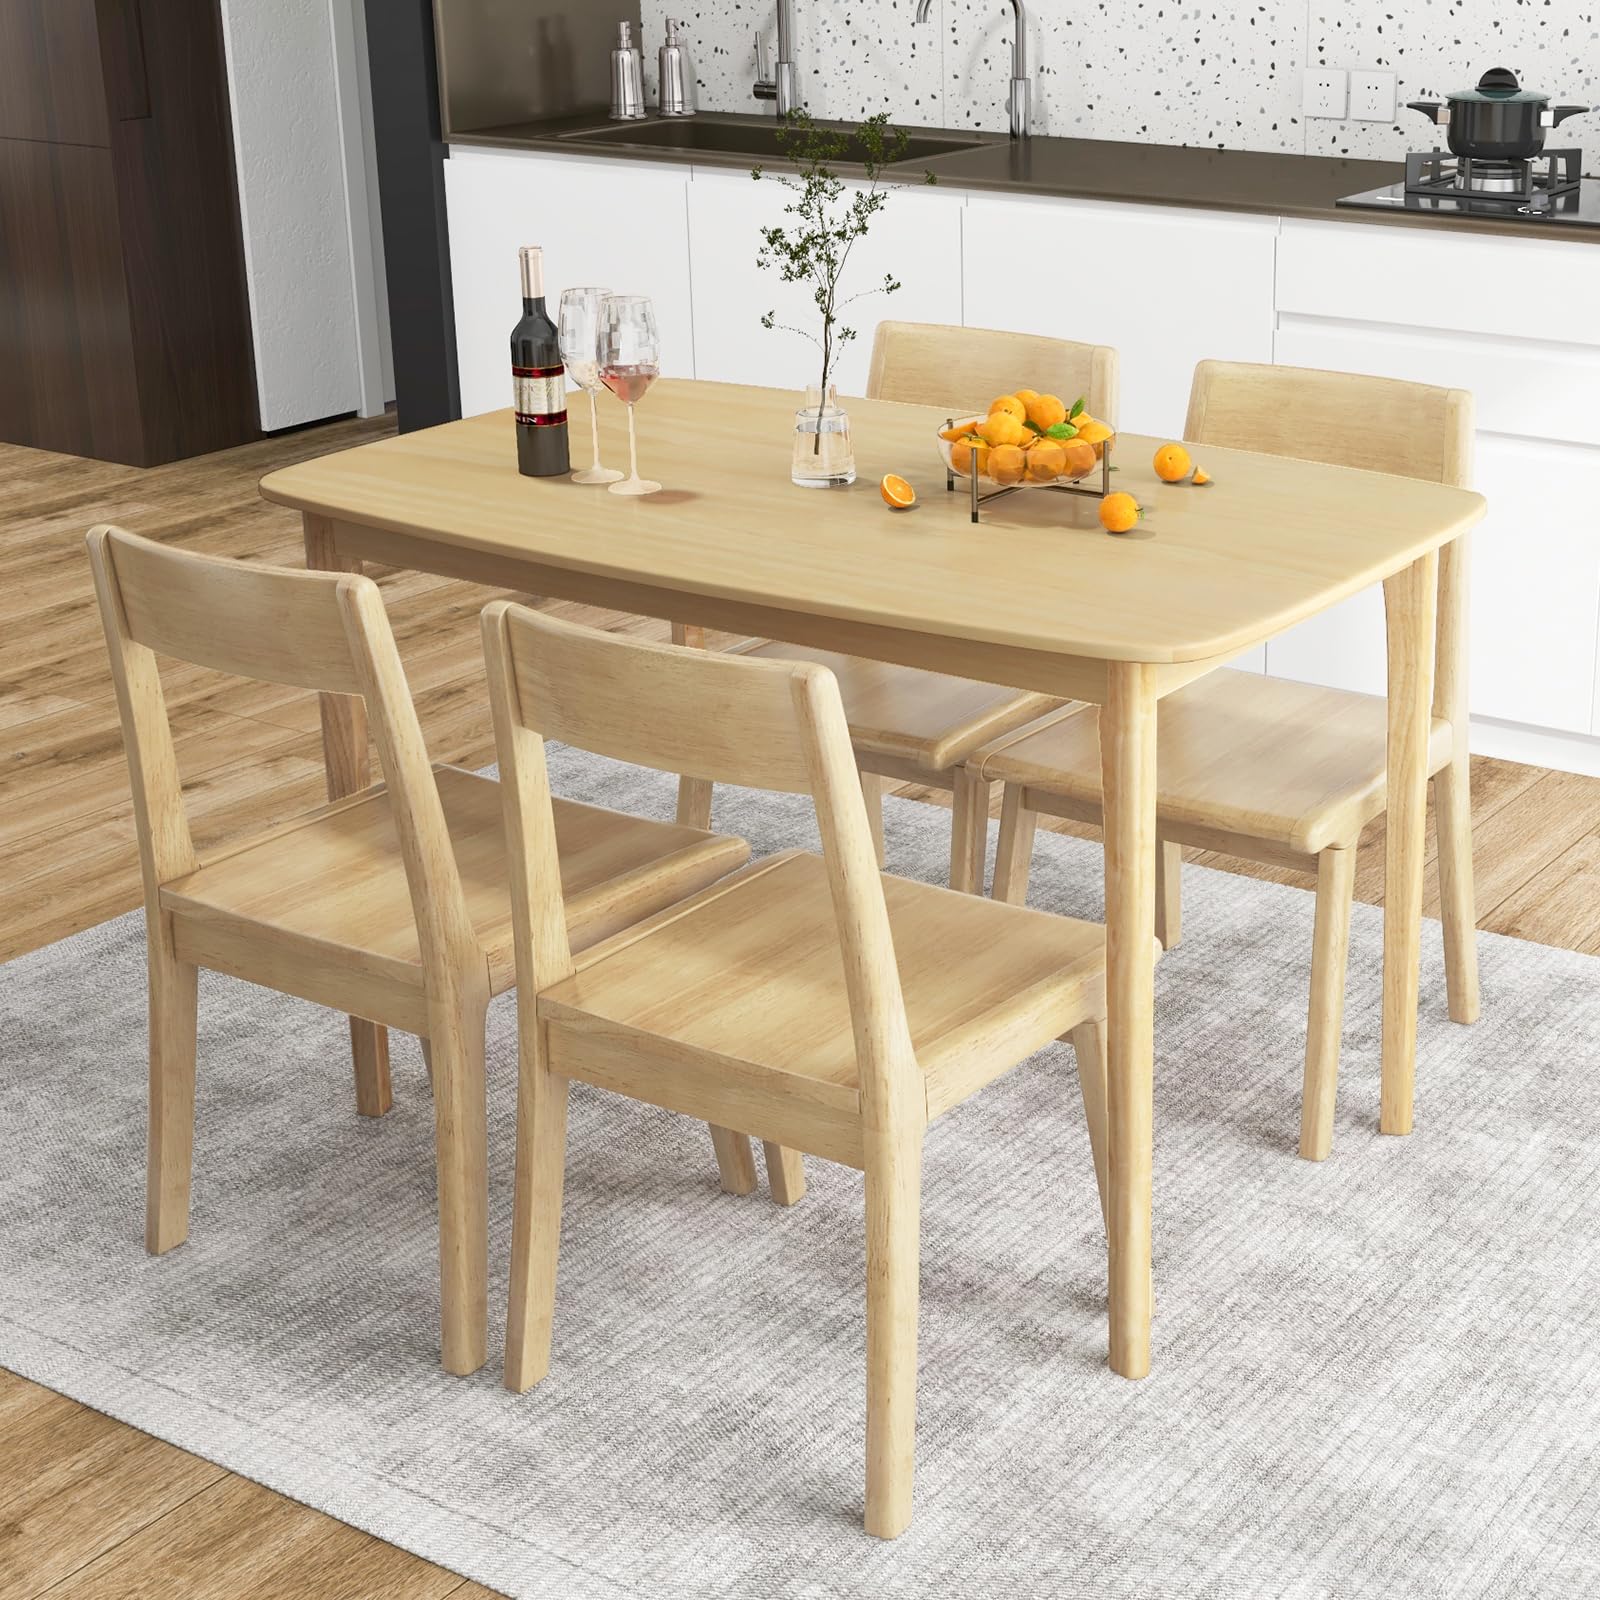 Giantex 48" L Rectangular Wooden Dining Table, Solid Rubber Wood Kitchen Table (Natural)